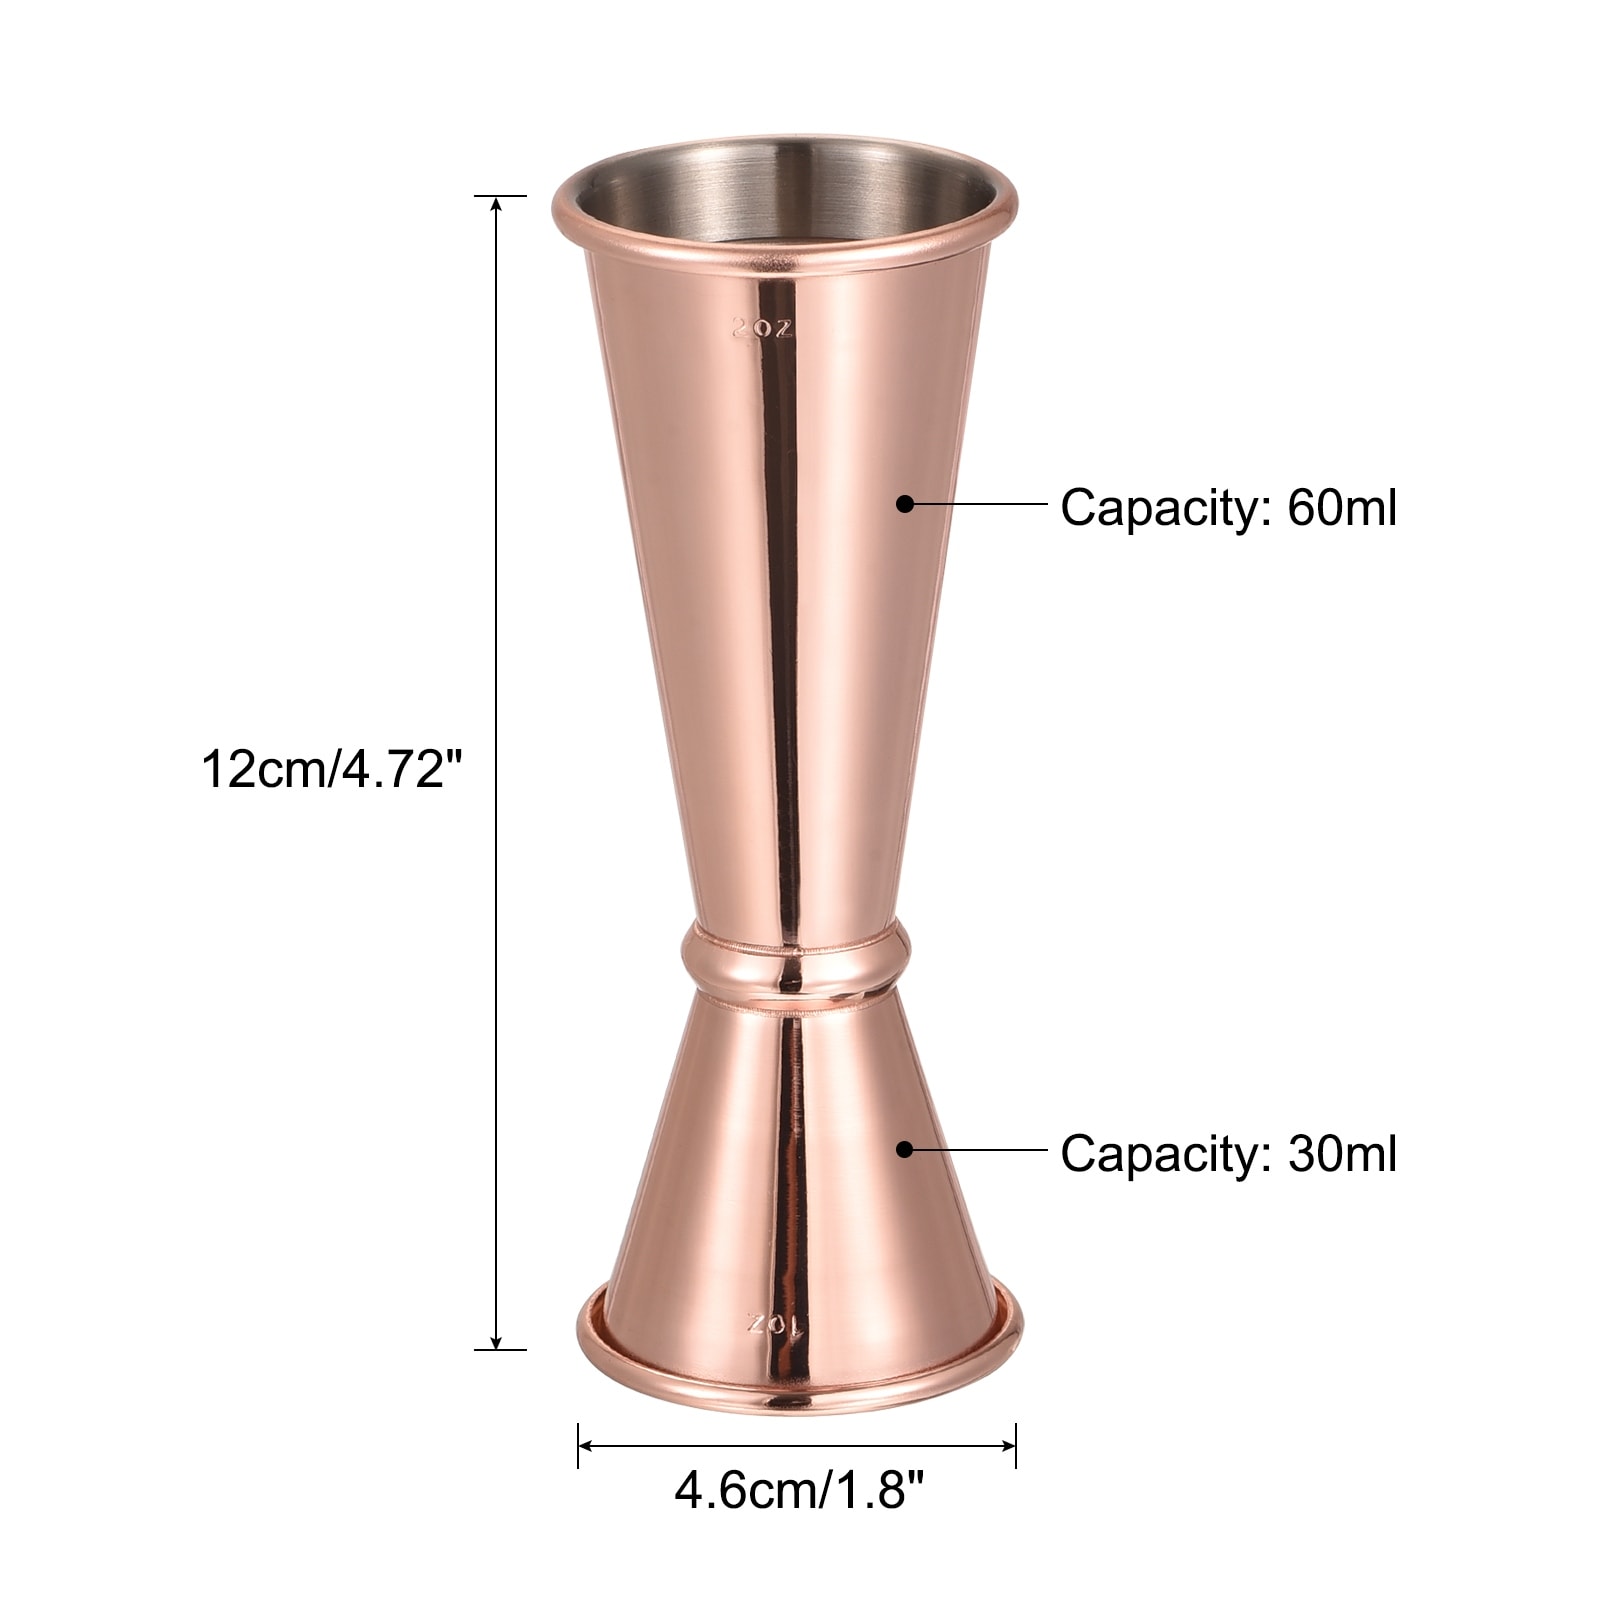 Cocktail Jigger - Double Jigger With Easy to Read Measurements Inside  (Copper)